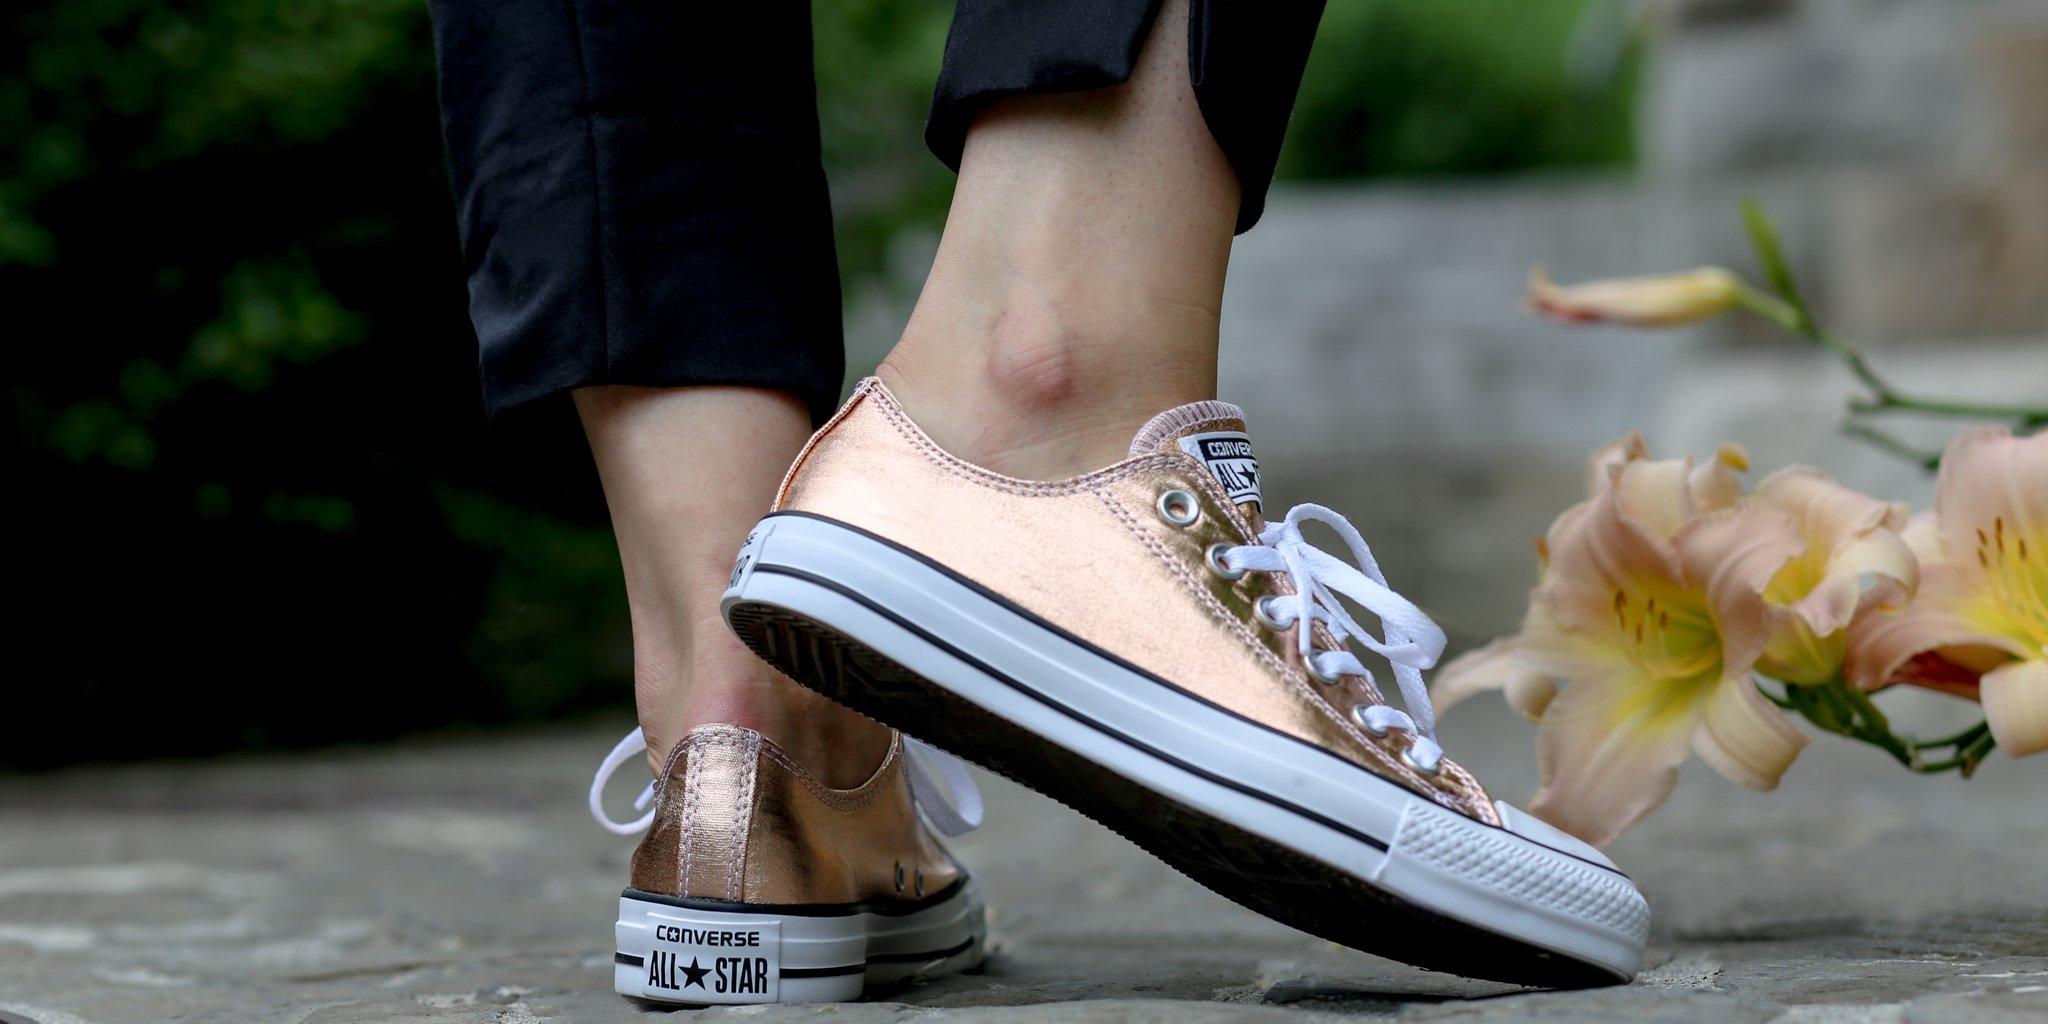 Fácil Relacionado compacto Titolo on Twitter: "NEW IN! Converse All Star OX - Metallic Sunset  Glow/White SHOP HERE: https://t.co/1aYwg1t3Qj https://t.co/GrbzajAwuC" /  Twitter